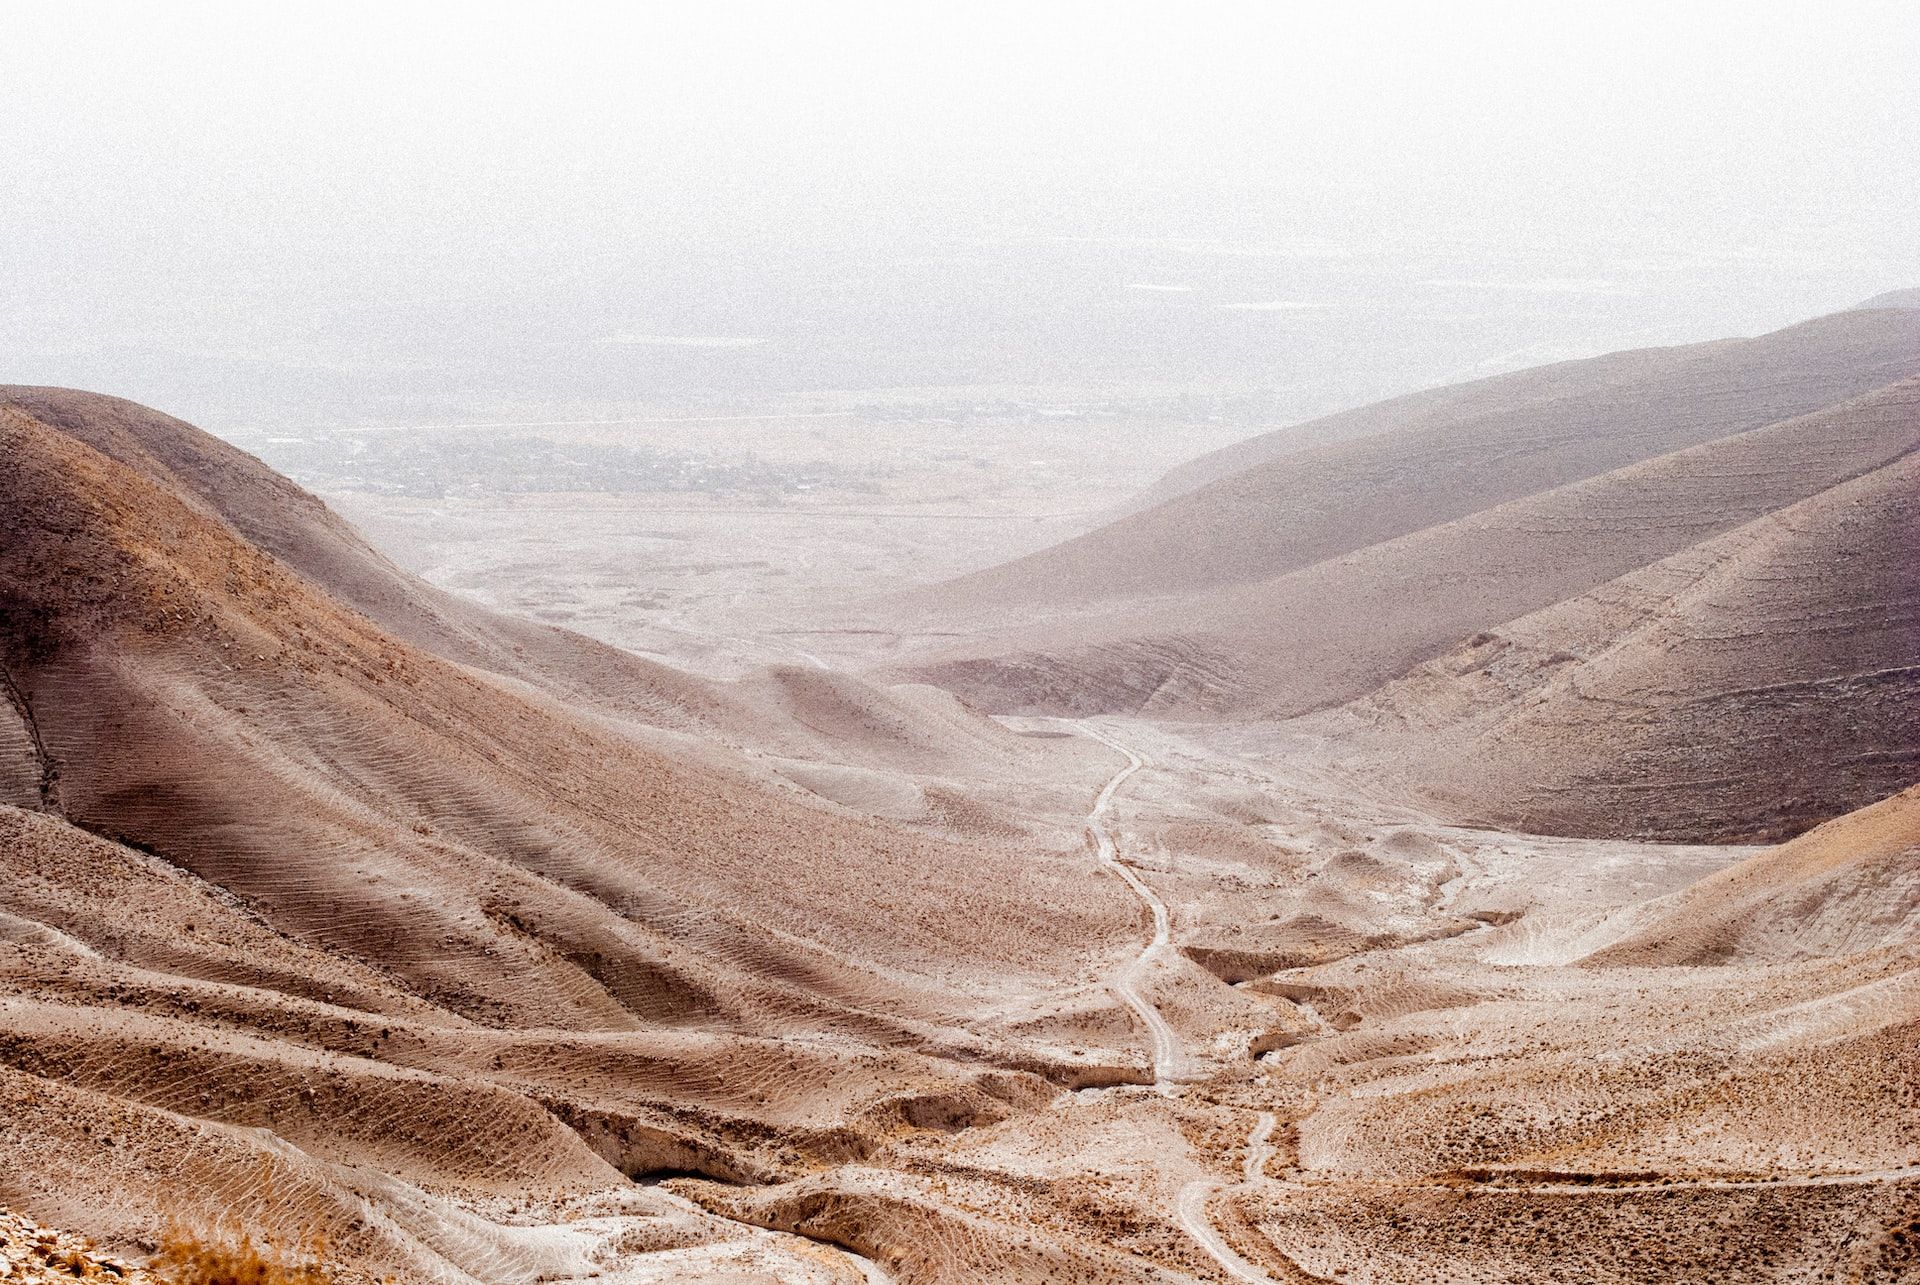 The Jordan Valley, seen from the top of Mount Sartaba